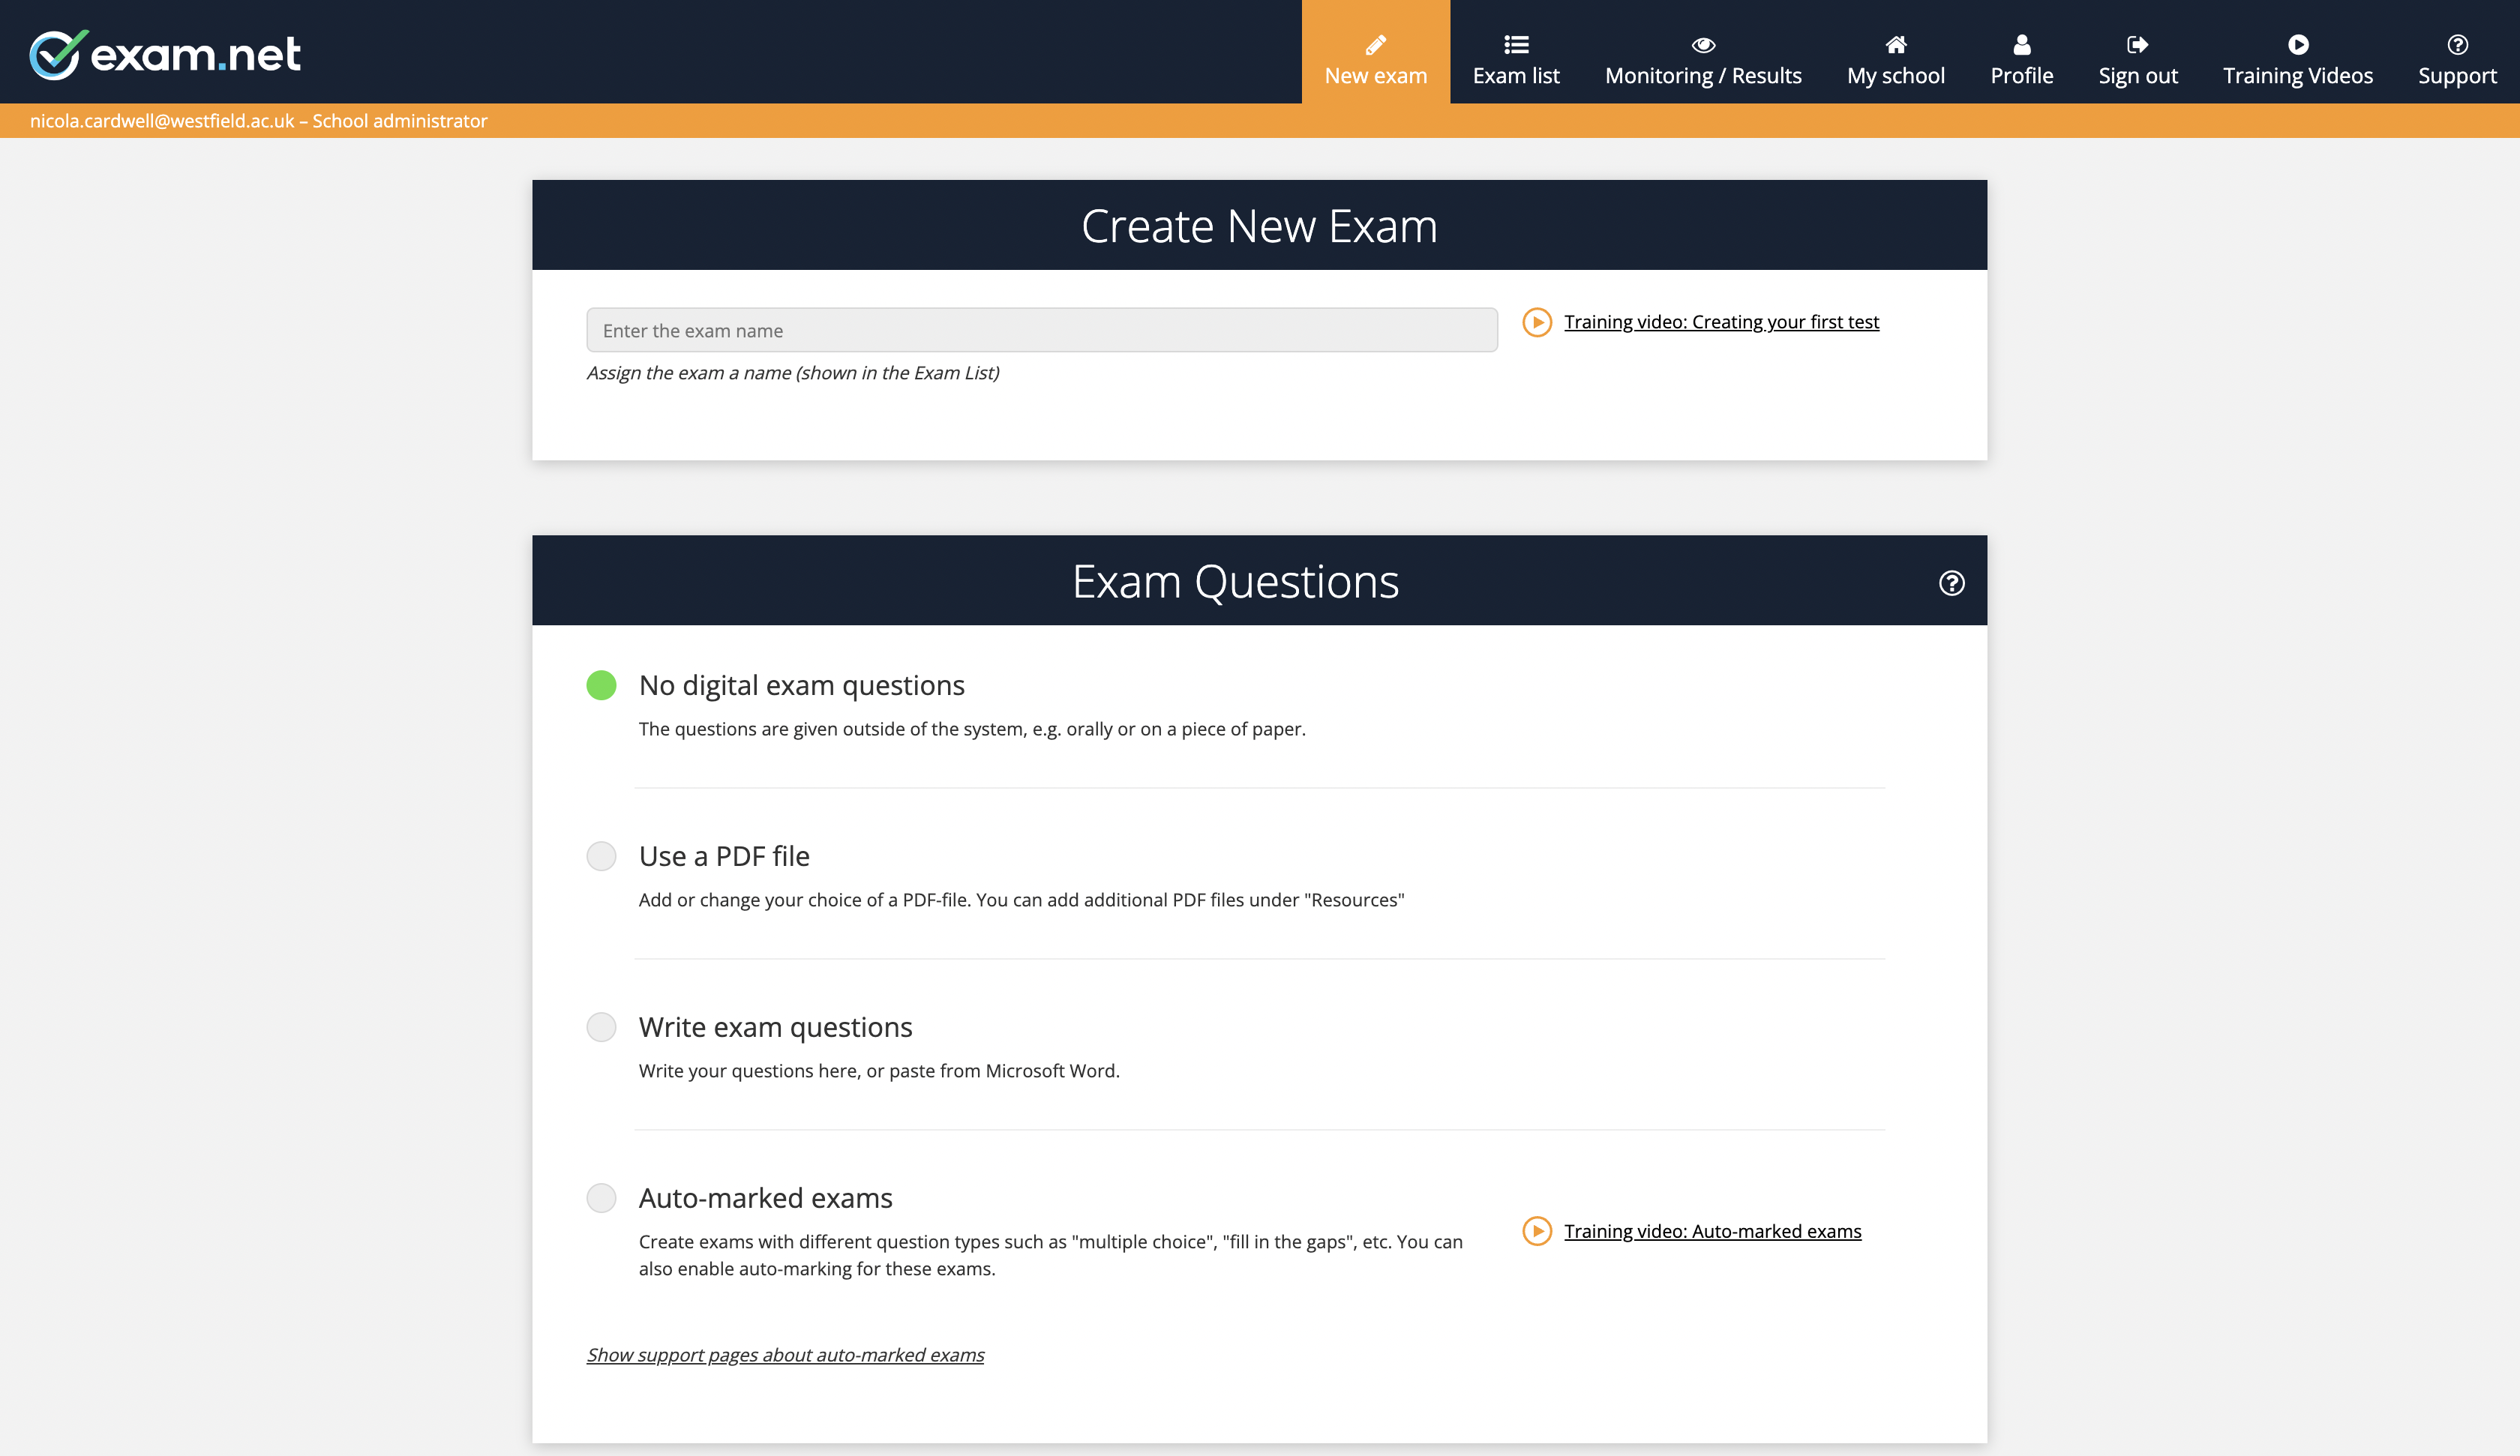 New Exam view: This is where you create a new exam. You can choose between uploading a PDF with existing questions, write exam questions directly in the tool or create an auto-marked exam where marking is done for you.